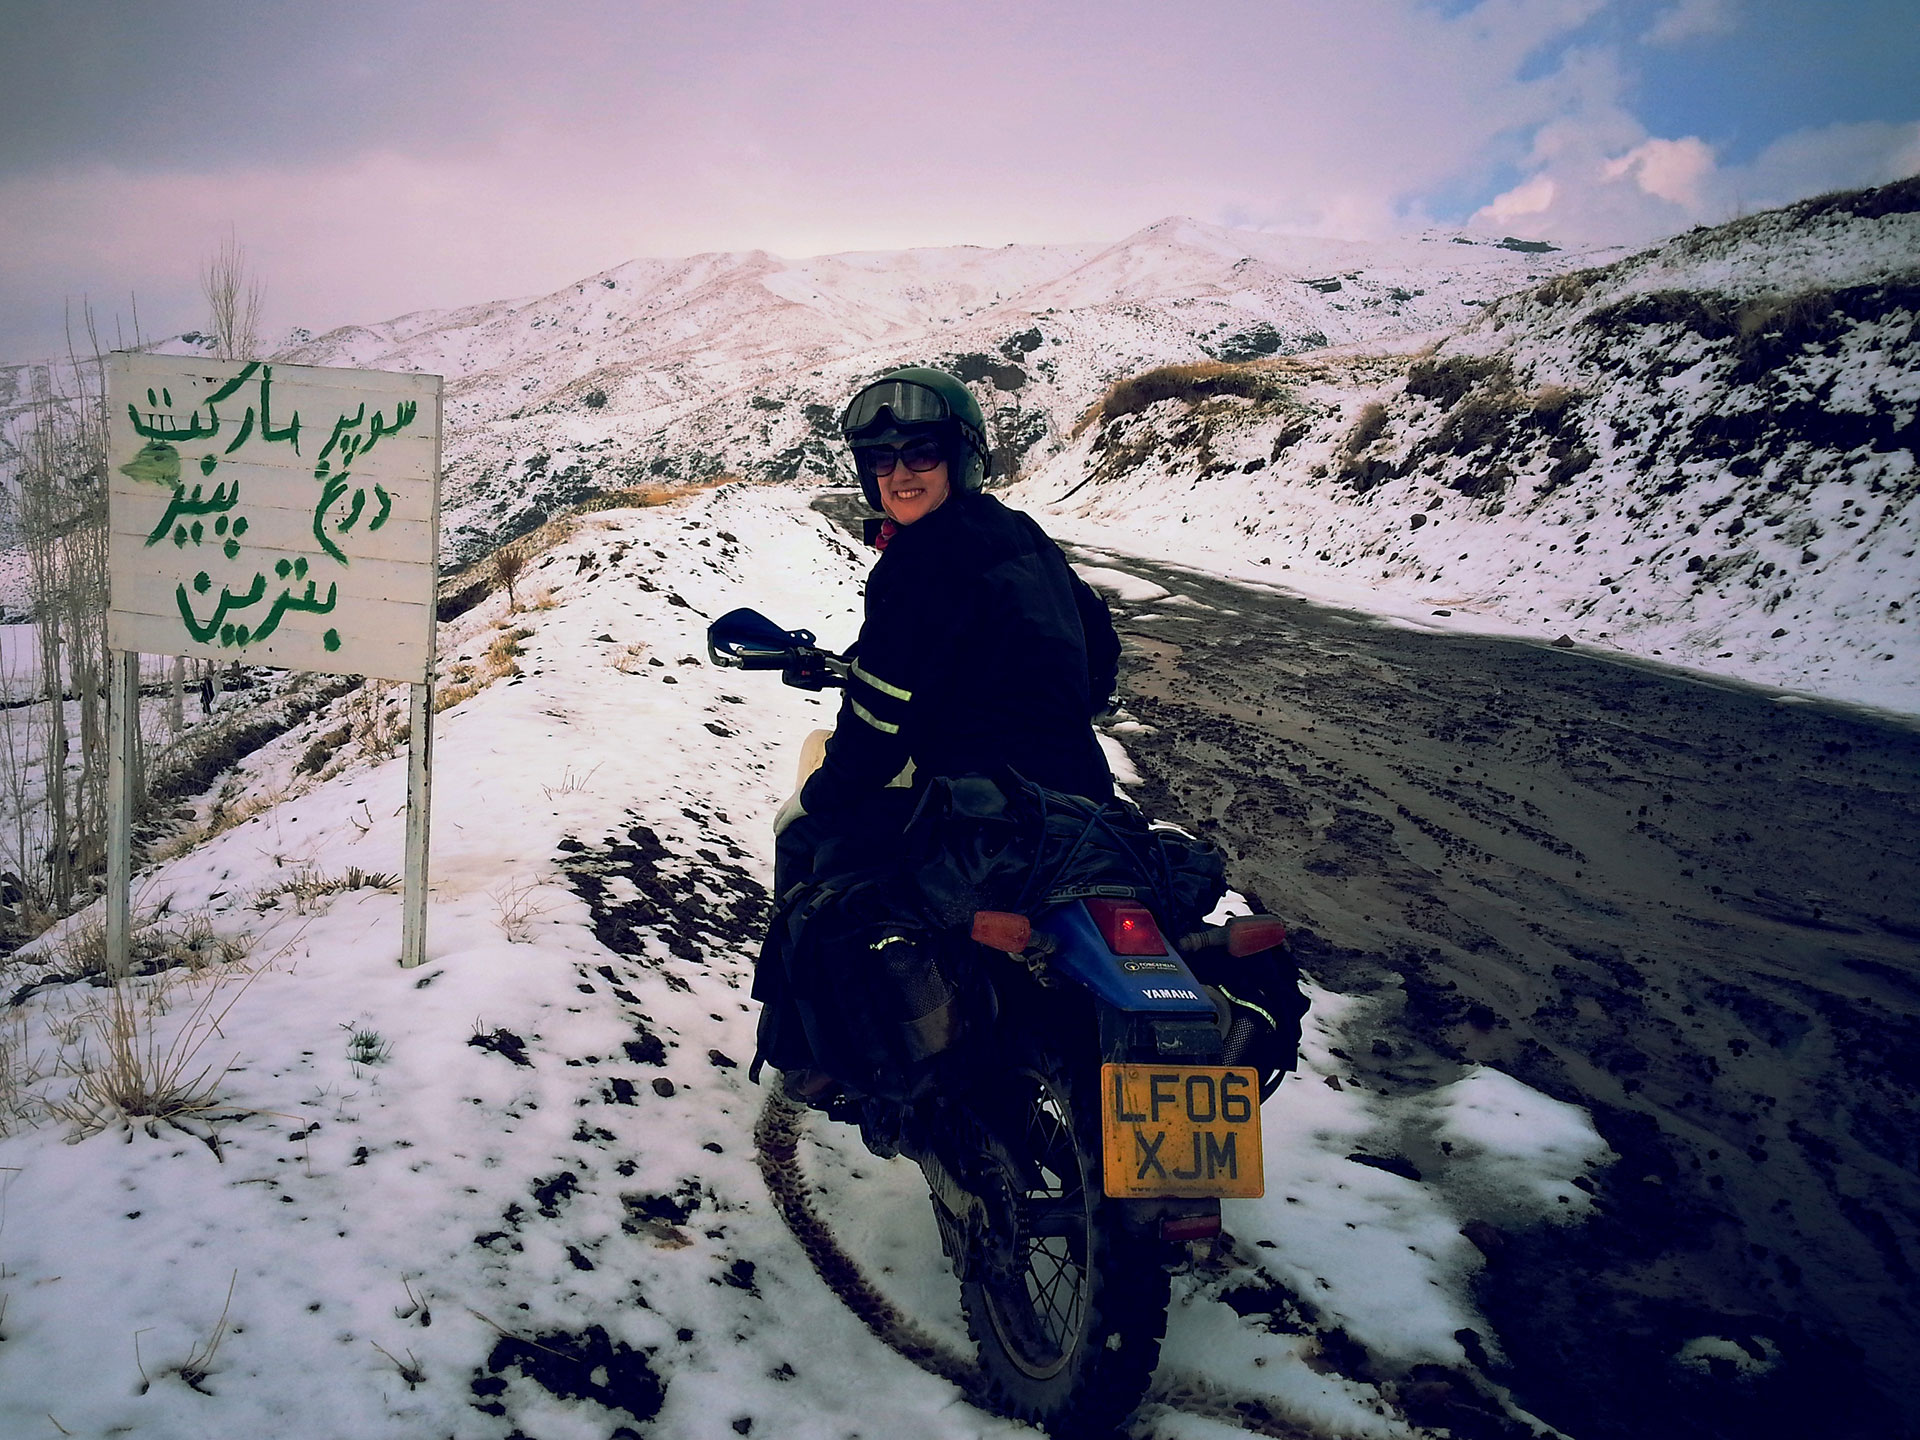 Author Lois Pryce in snowy Iranian mountains on her motorbike adventure